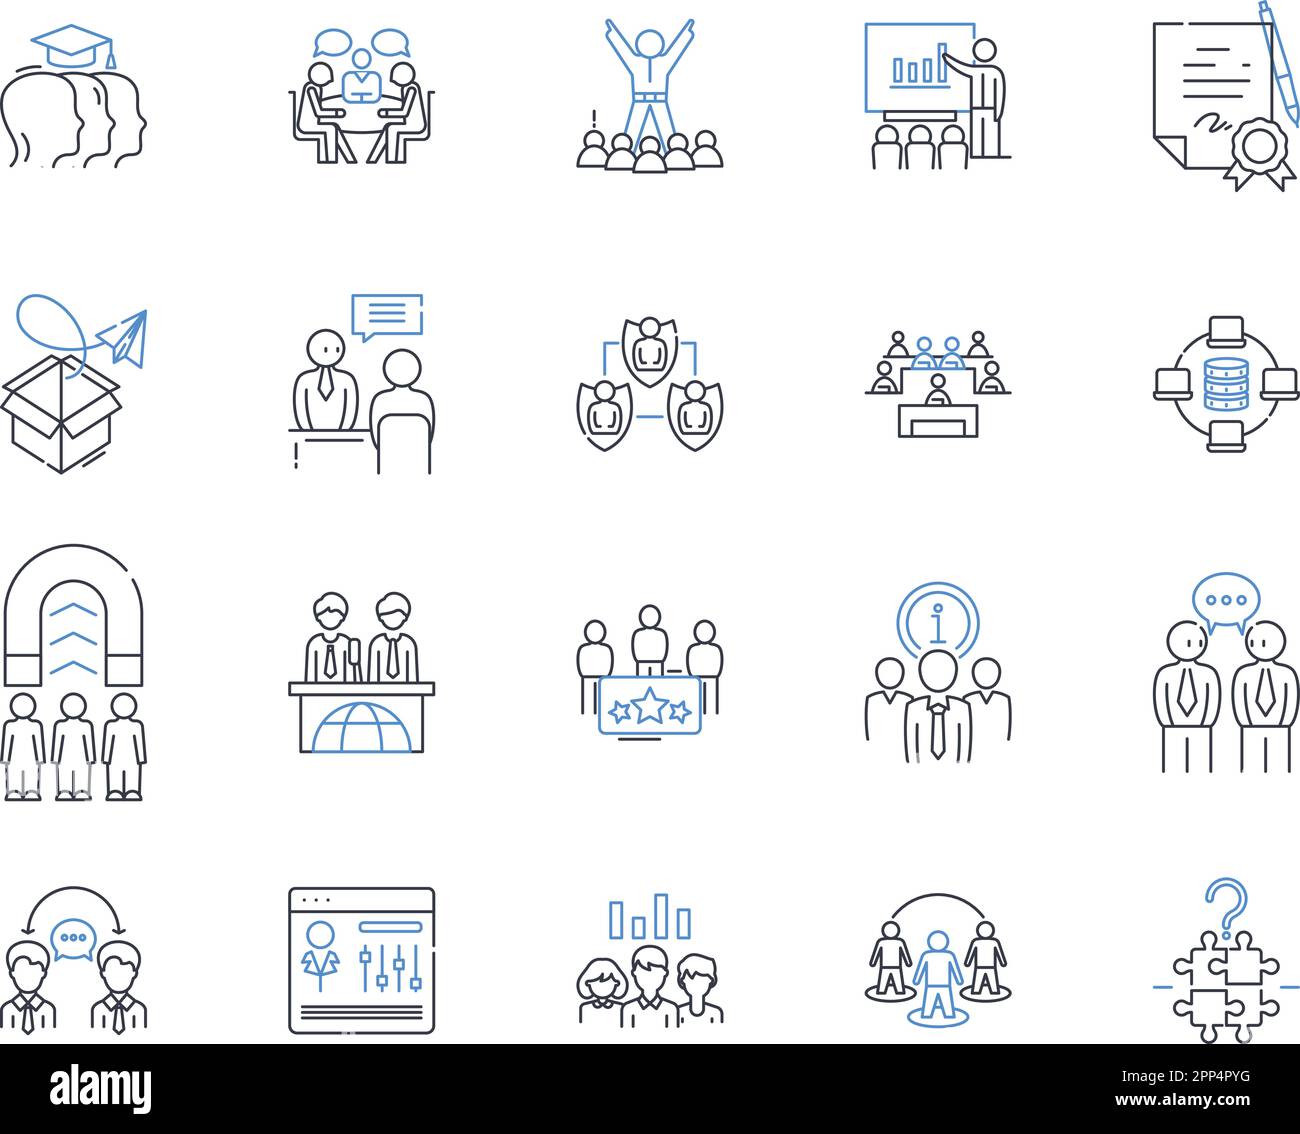 Marketing planning line icons collection. Strategy, Analytics, Objectives, Budget, Research, Segmentation, Targeting vector and linear illustration Stock Vector